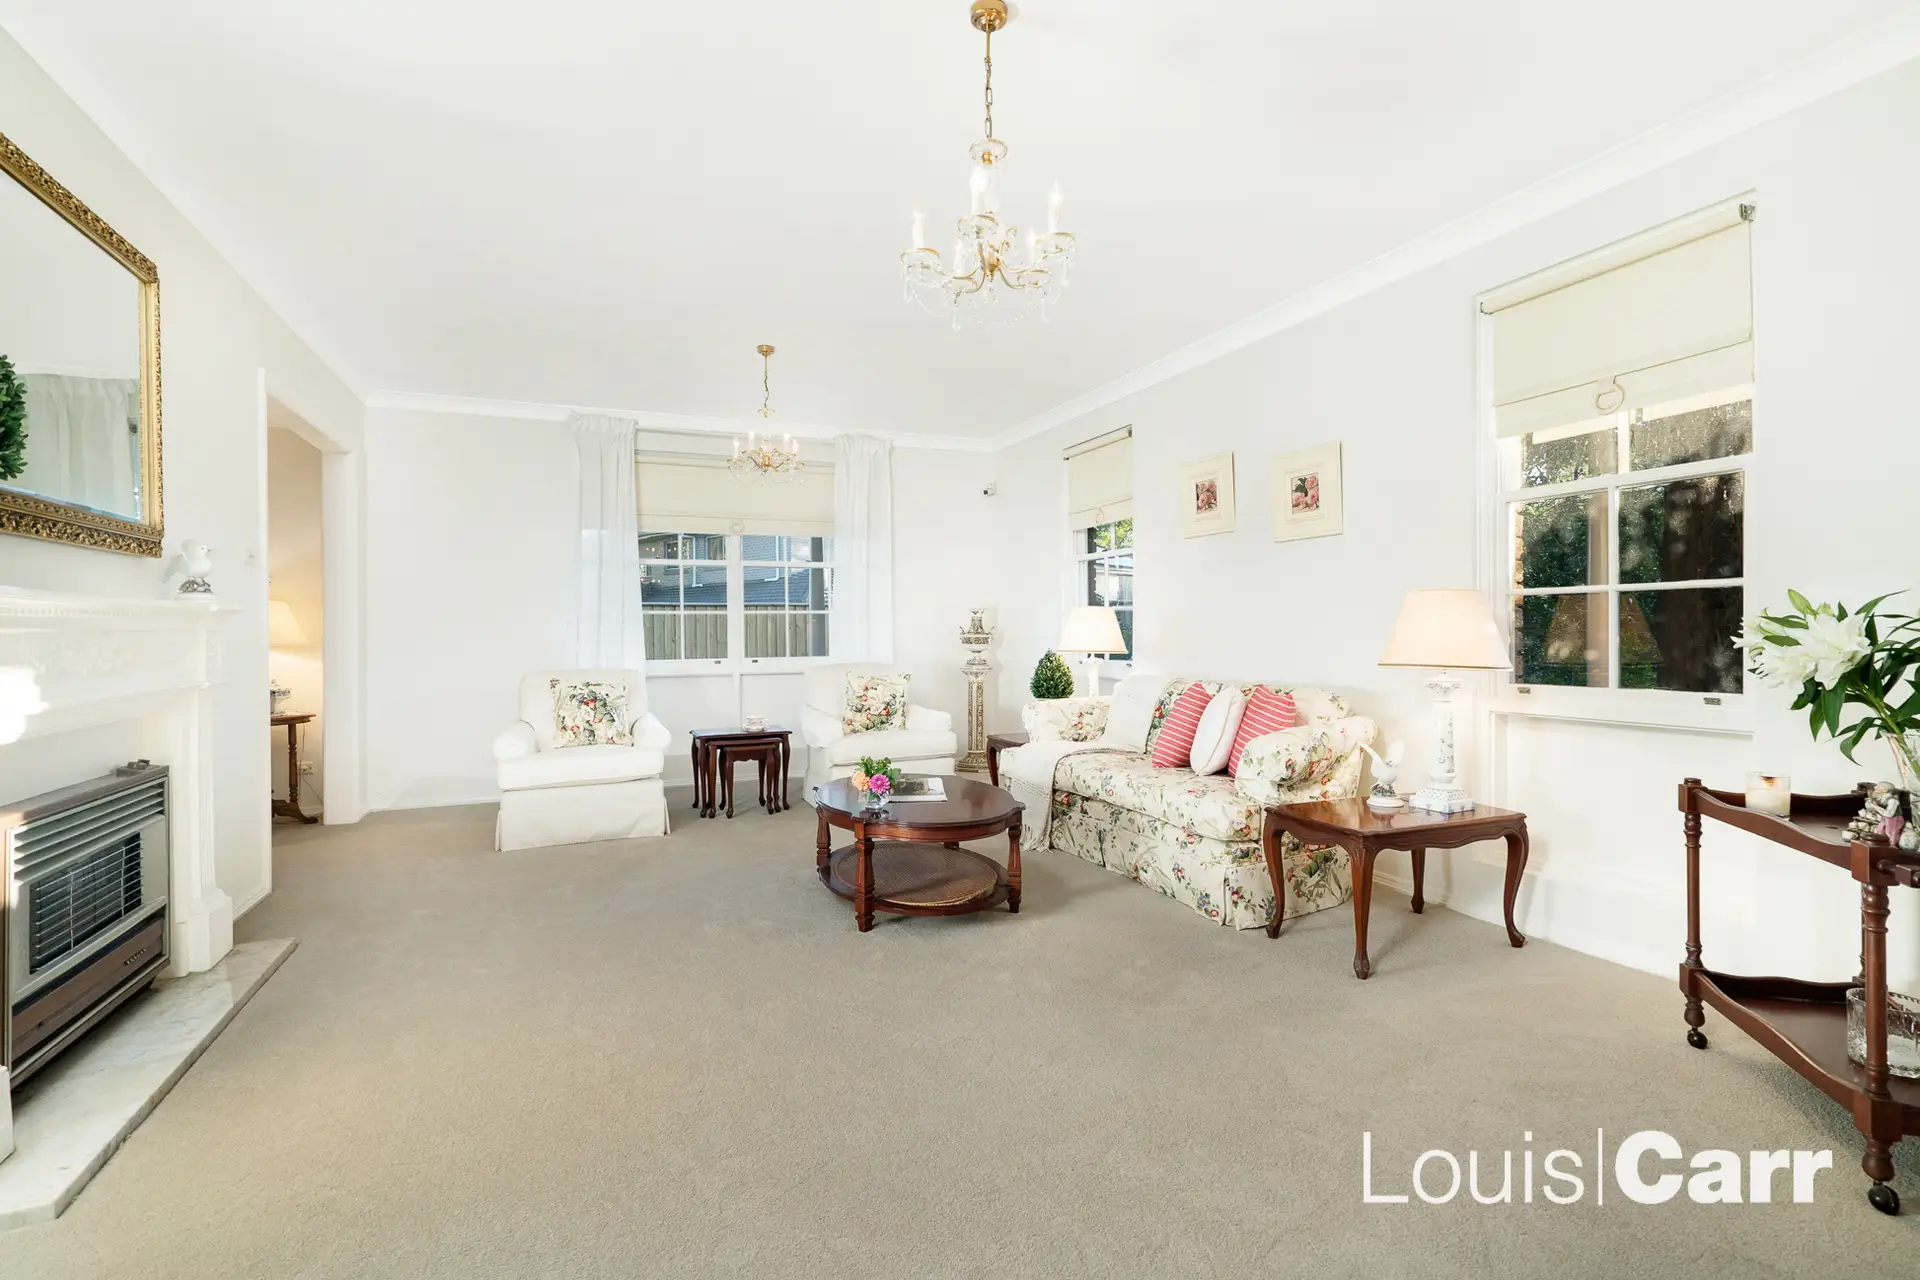 Photo #7: 2 Gumnut Road, Cherrybrook - Sold by Louis Carr Real Estate